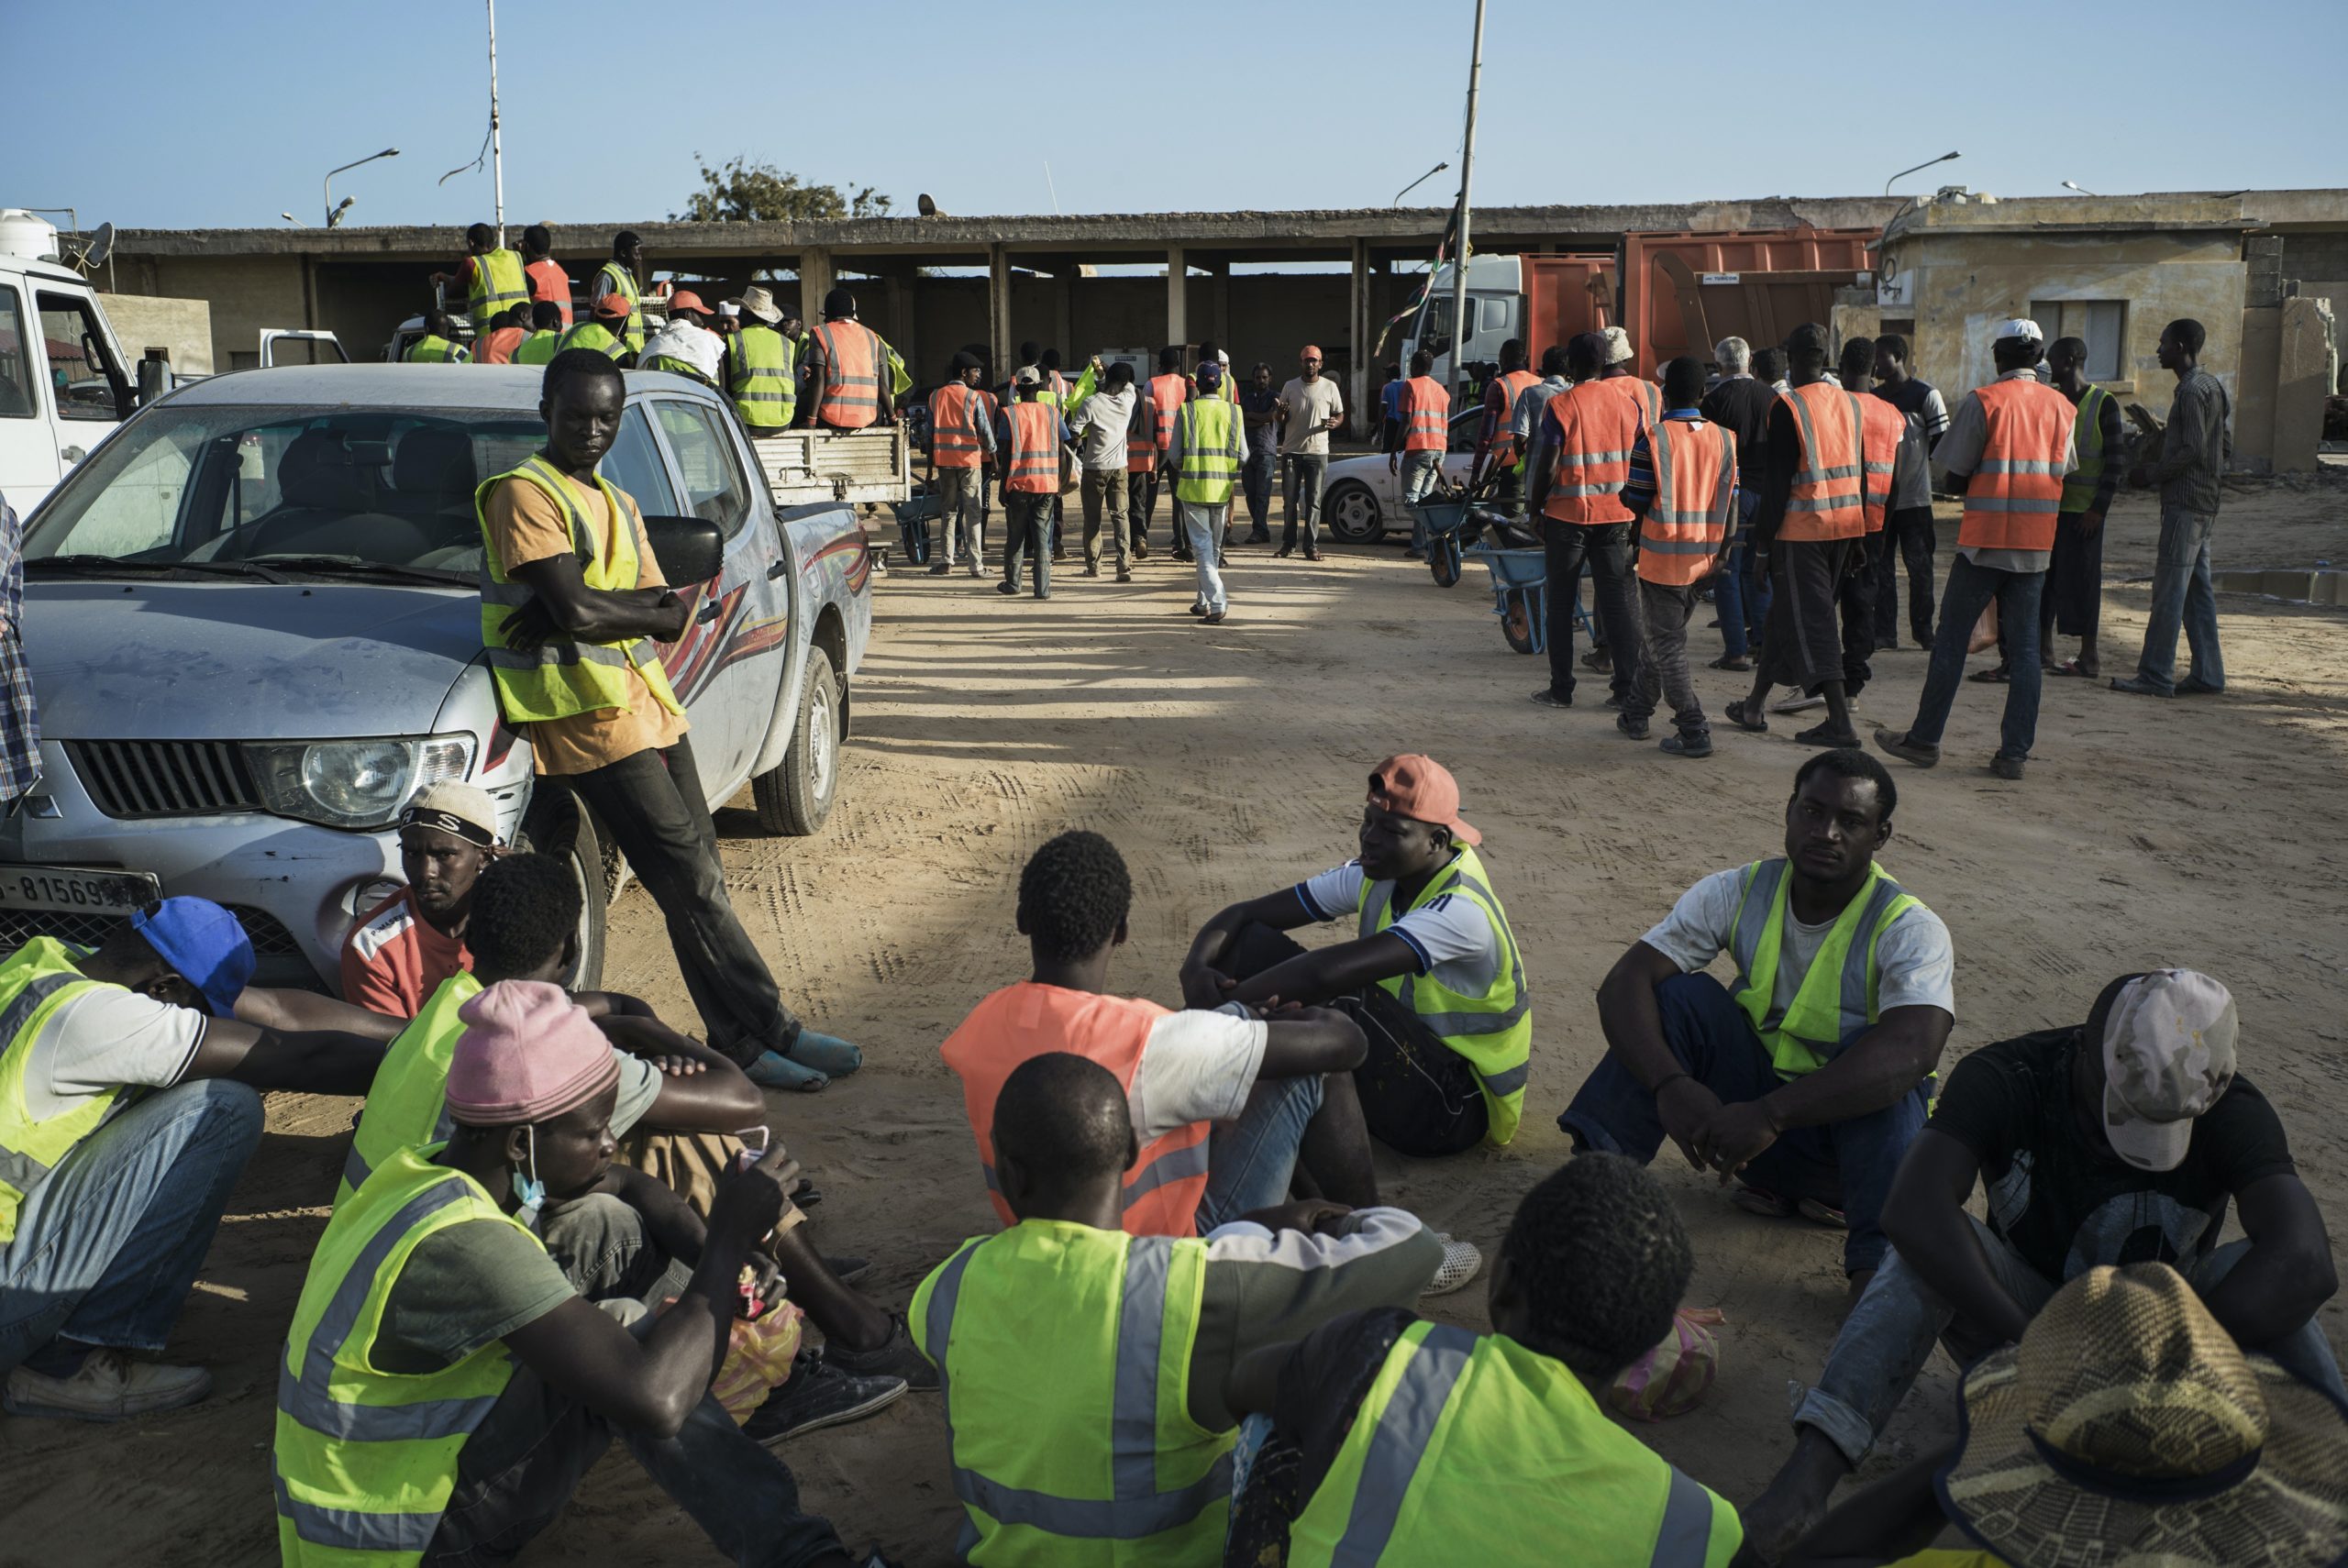 Migrants stand in line in the morning waiting for daily work in Zuwara, Libya, on Sept. 15th 2015.